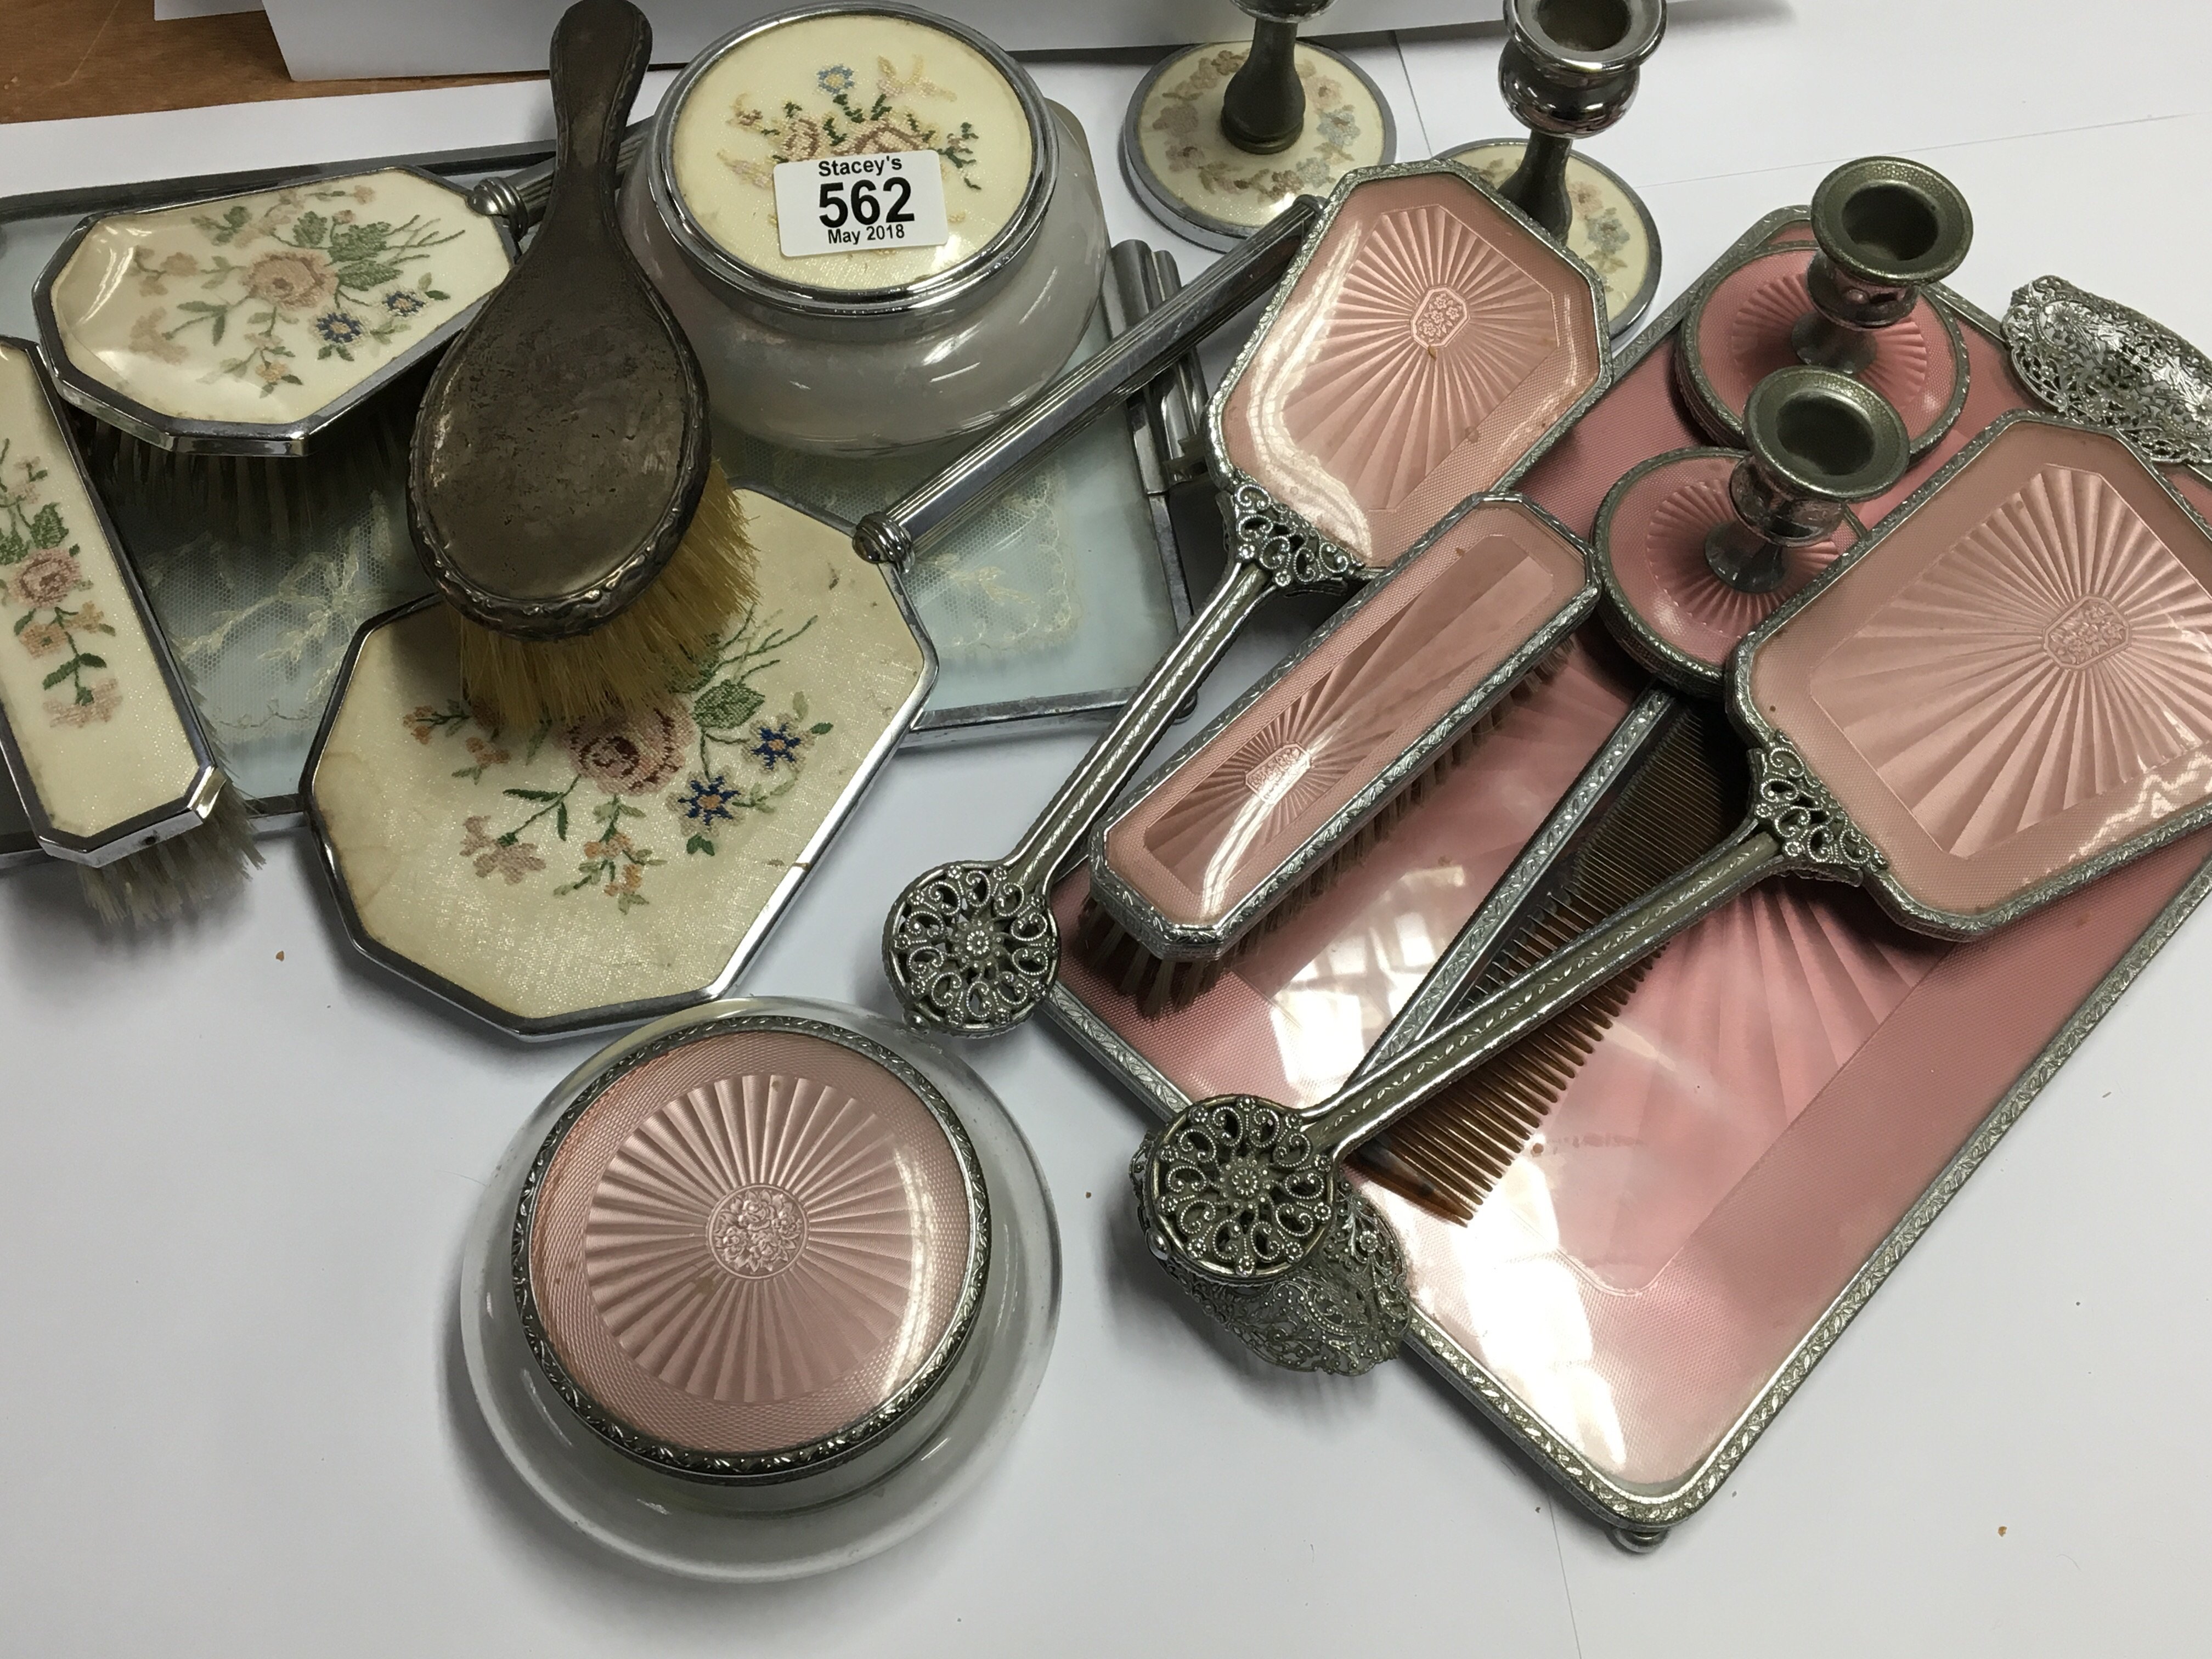 Two Ladies dressing table sets and a silver brush.